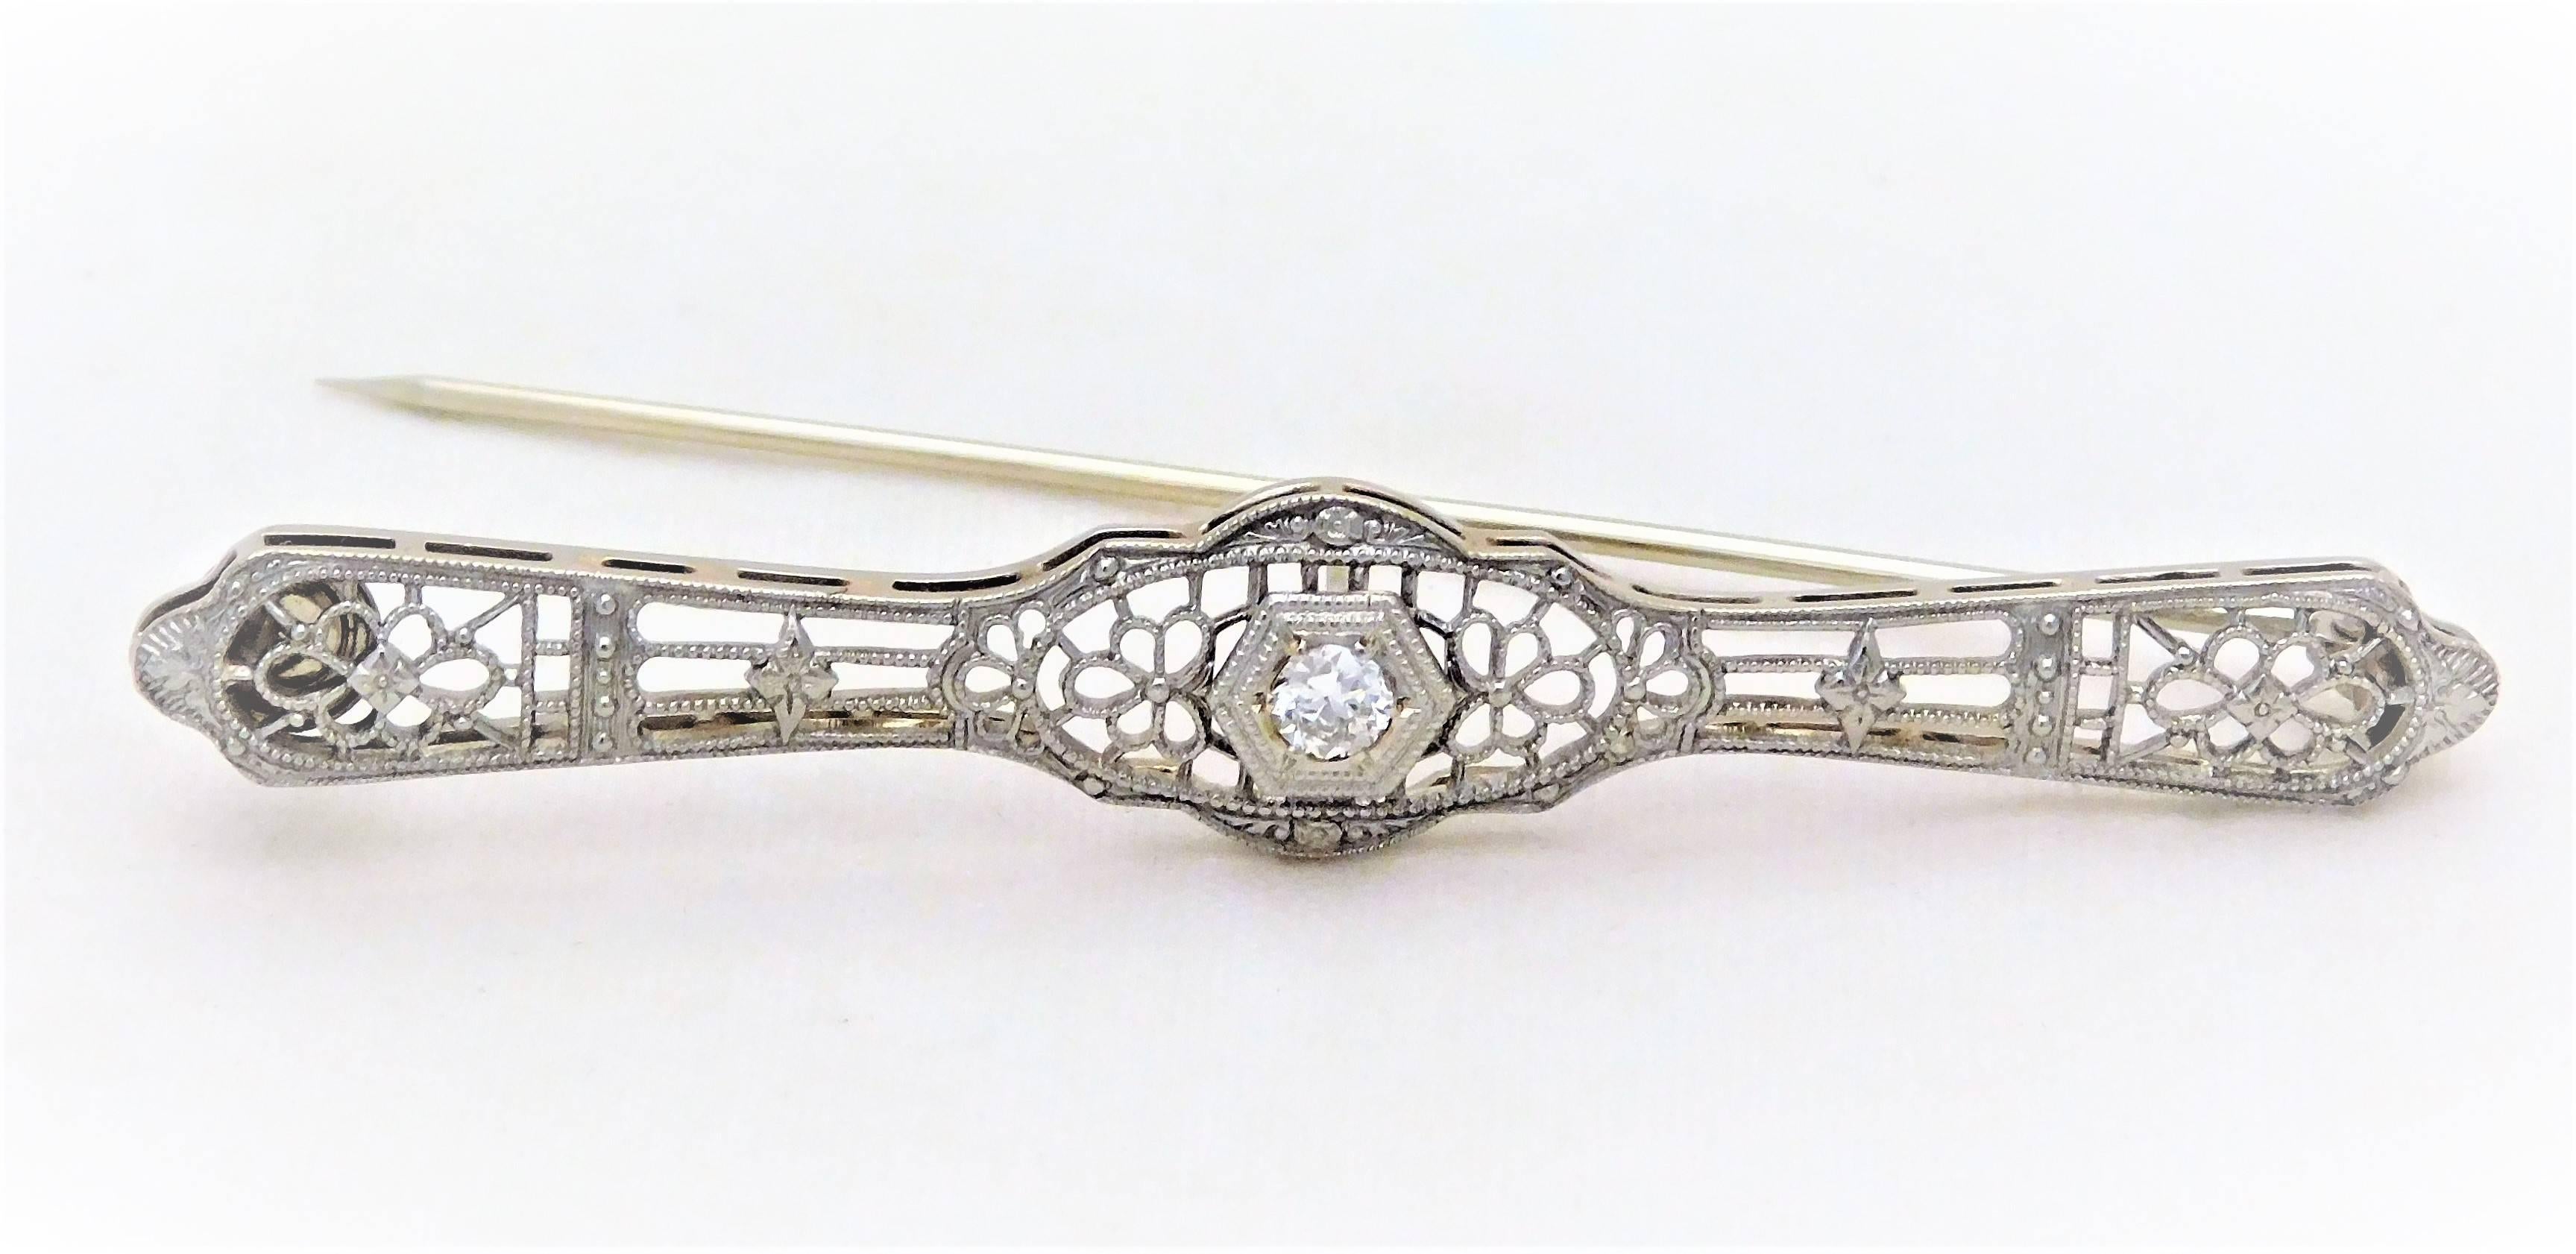 Edwardian 10k White Gold and Diamond Bar Pin
100+ years ago bar pins were an everyday tool in the early to mid-1900’s.  Much like brooches, bar pins have a bar hinged on one end with a locking mechanism on the other.  They were most popularly worn